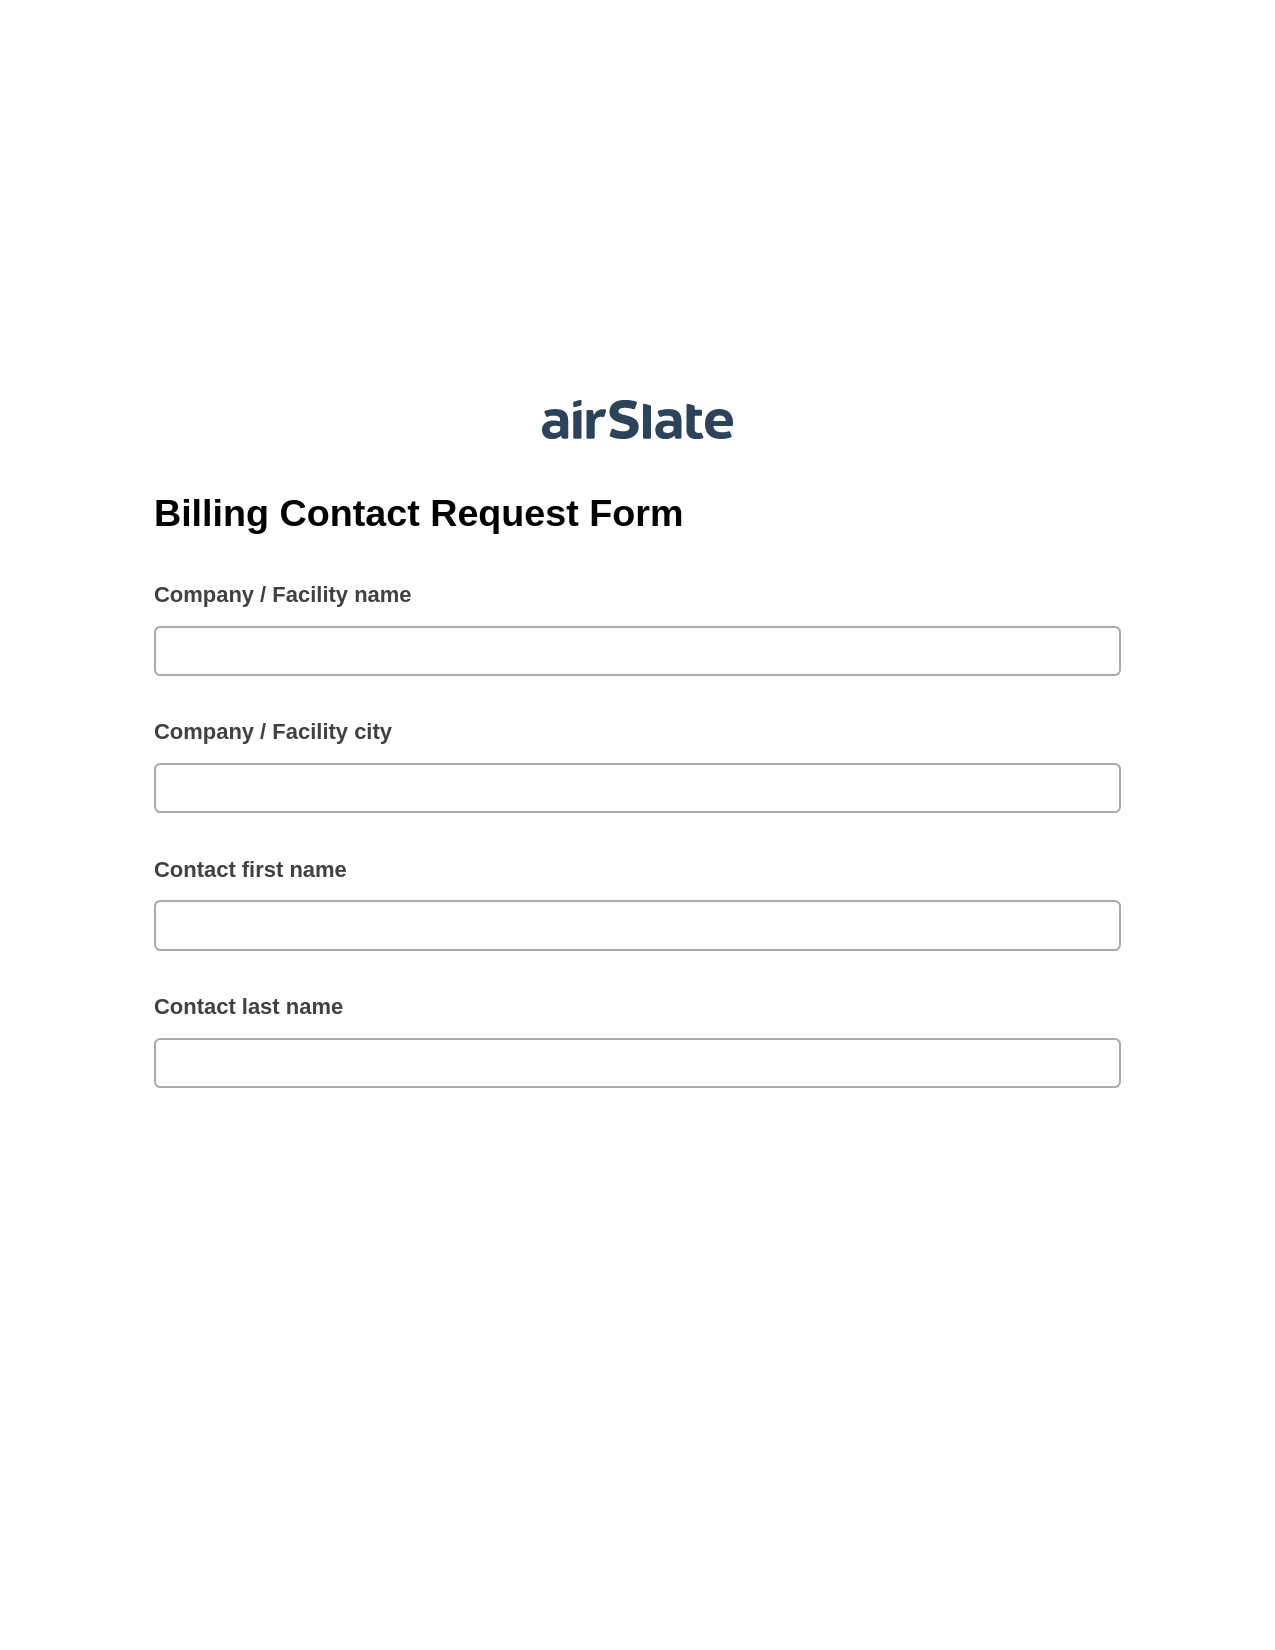 Billing Contact Request Form Pre-fill from Salesforce Record Bot, SendGrid send Campaign bot, Slack Two-Way Binding Bot